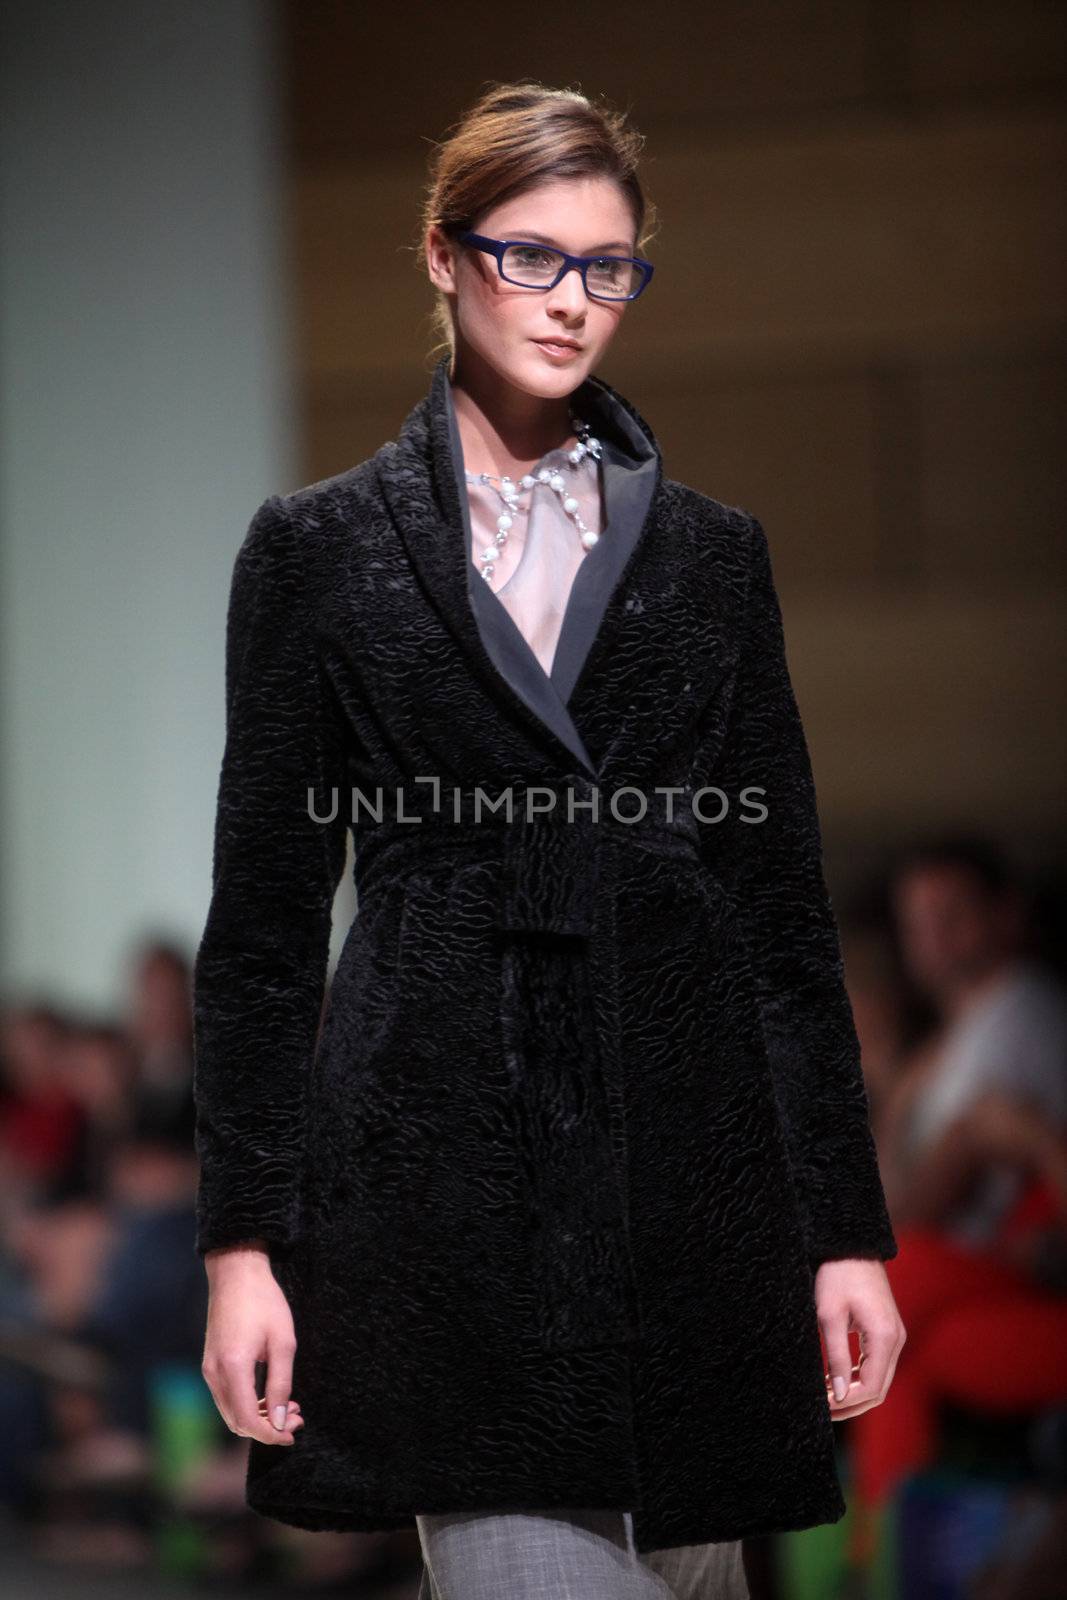 ZAGREB, CROATIA - May 10: Fashion model wears clothes made by Aba Tomicic Drvar on "ZAGREB FASHION WEEK" show on May 10, 2012 in Zagreb, Croatia.